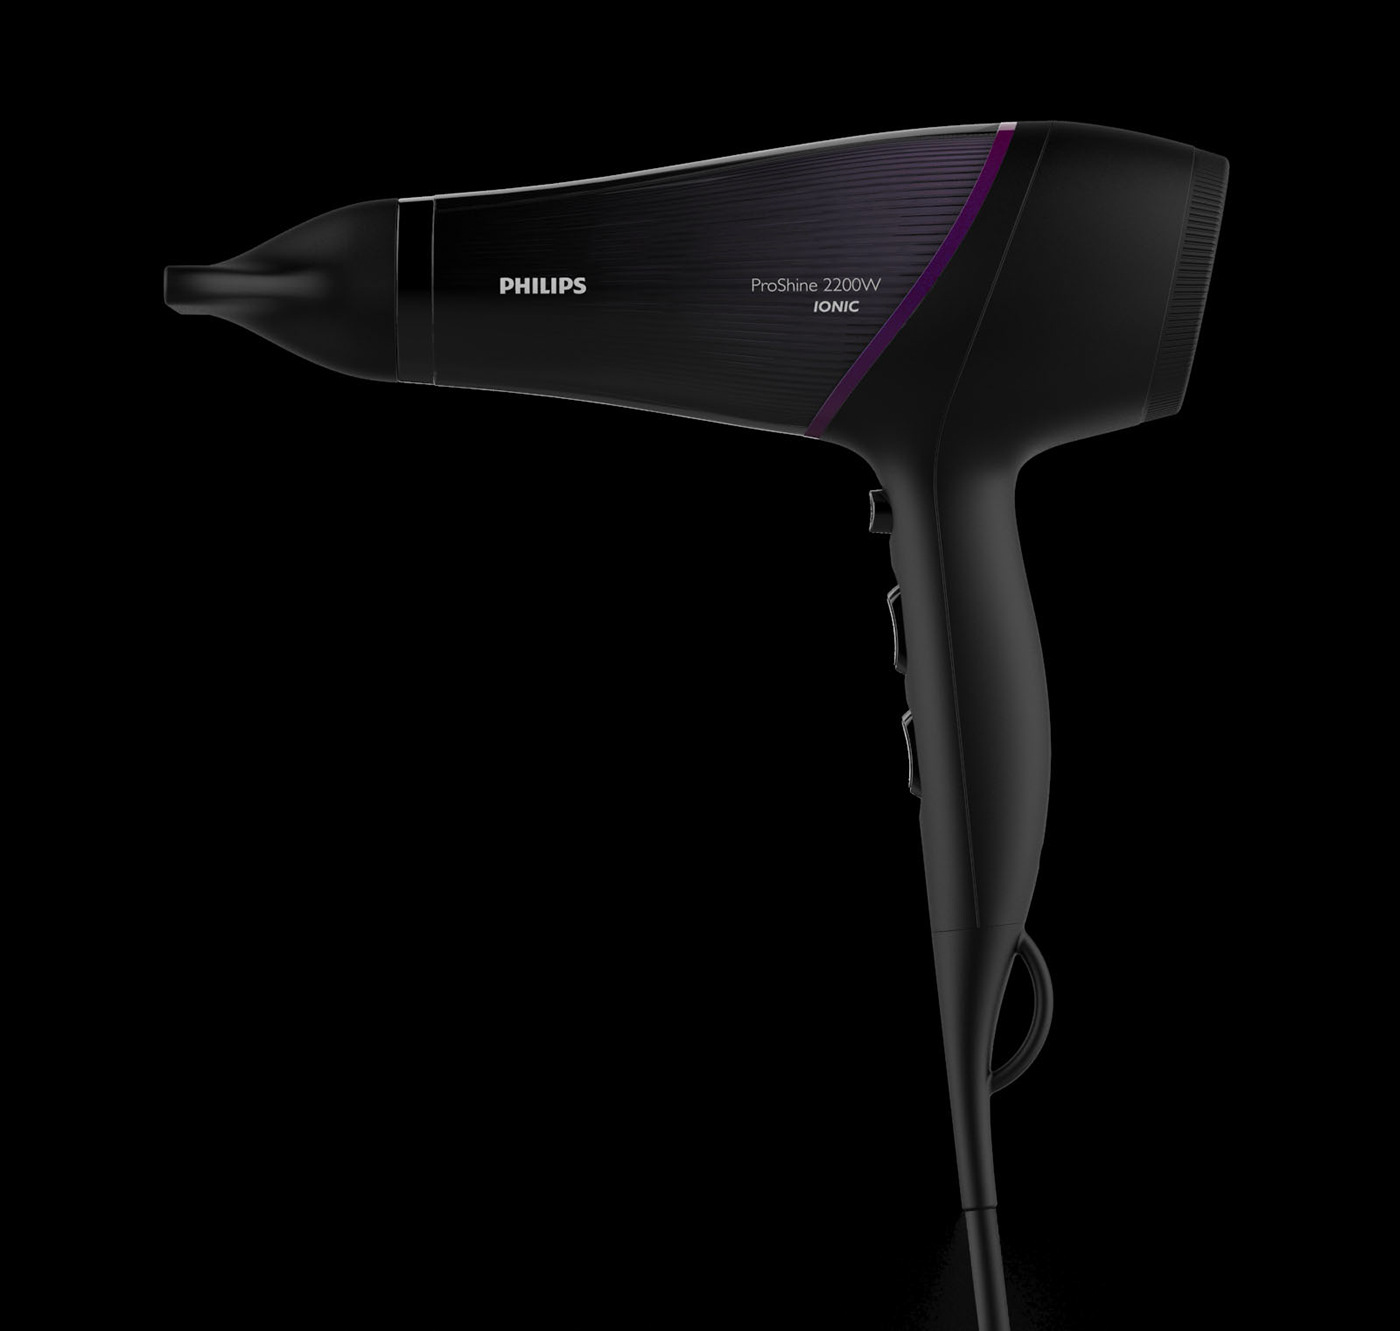 beauty hairdryer haircare Performance pattern